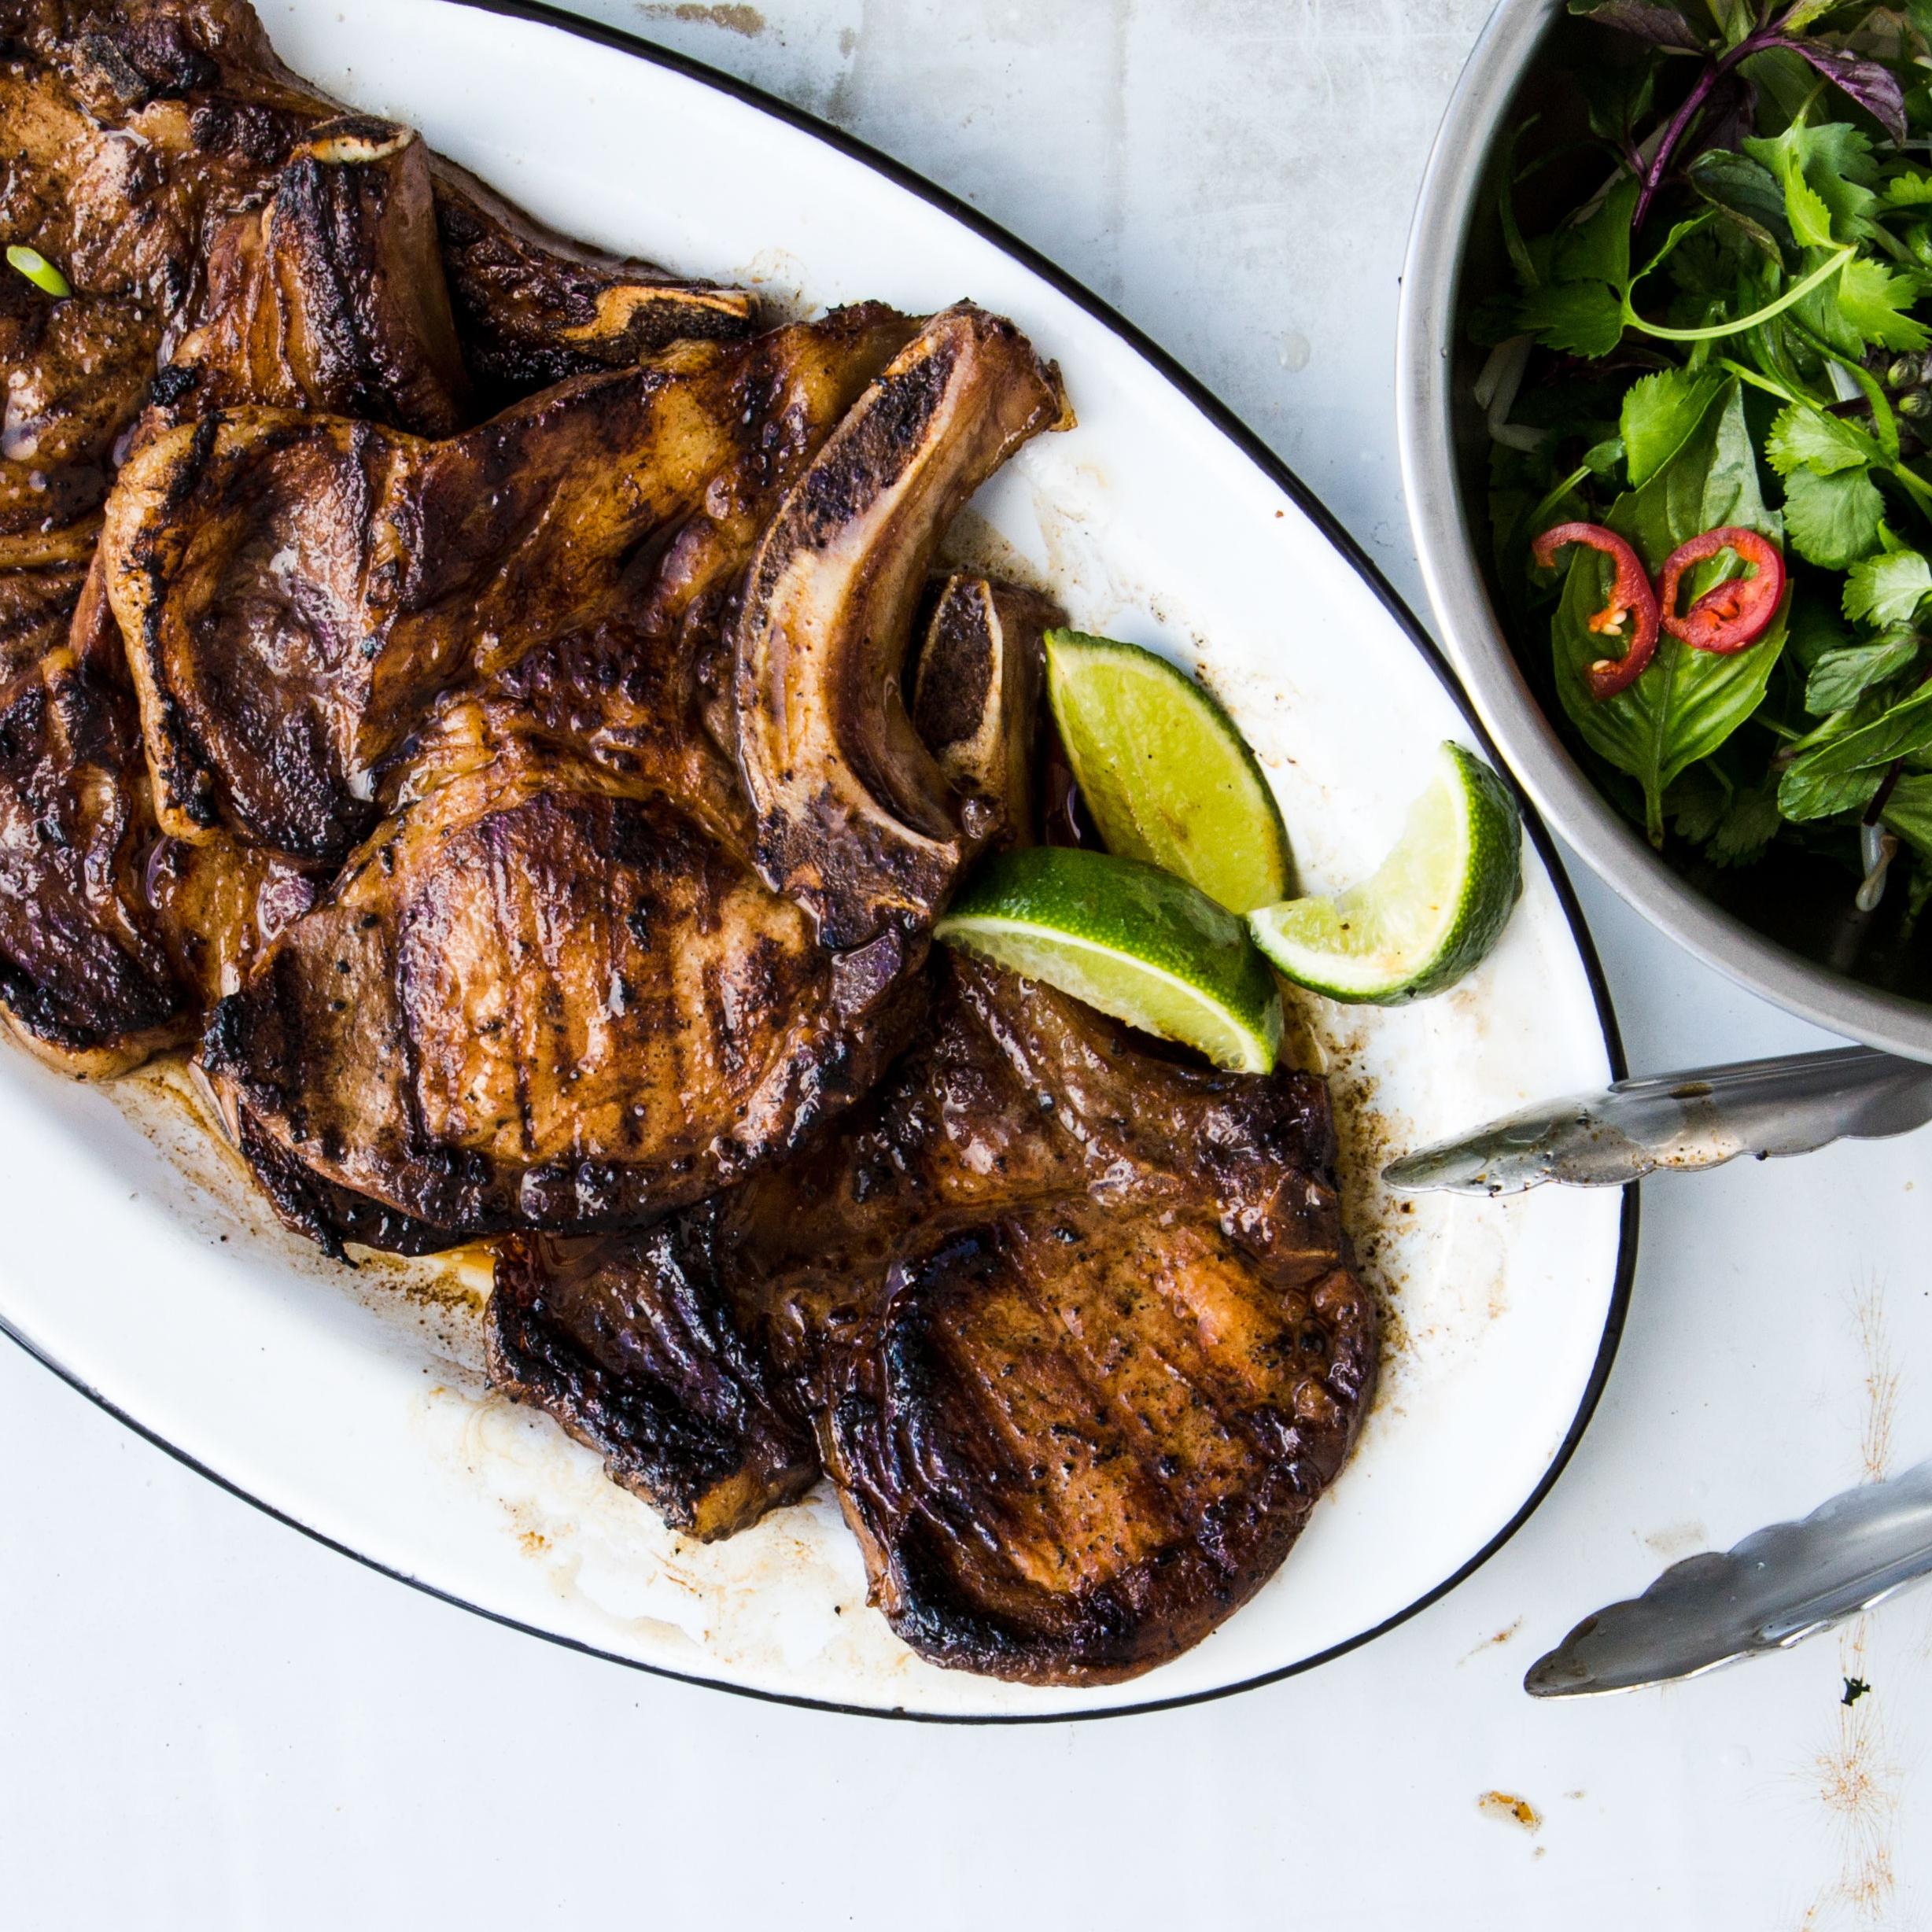  Spice up your taste buds with juicy and flavorful grilled pork chops, infused with traditional Vietnamese herbs.